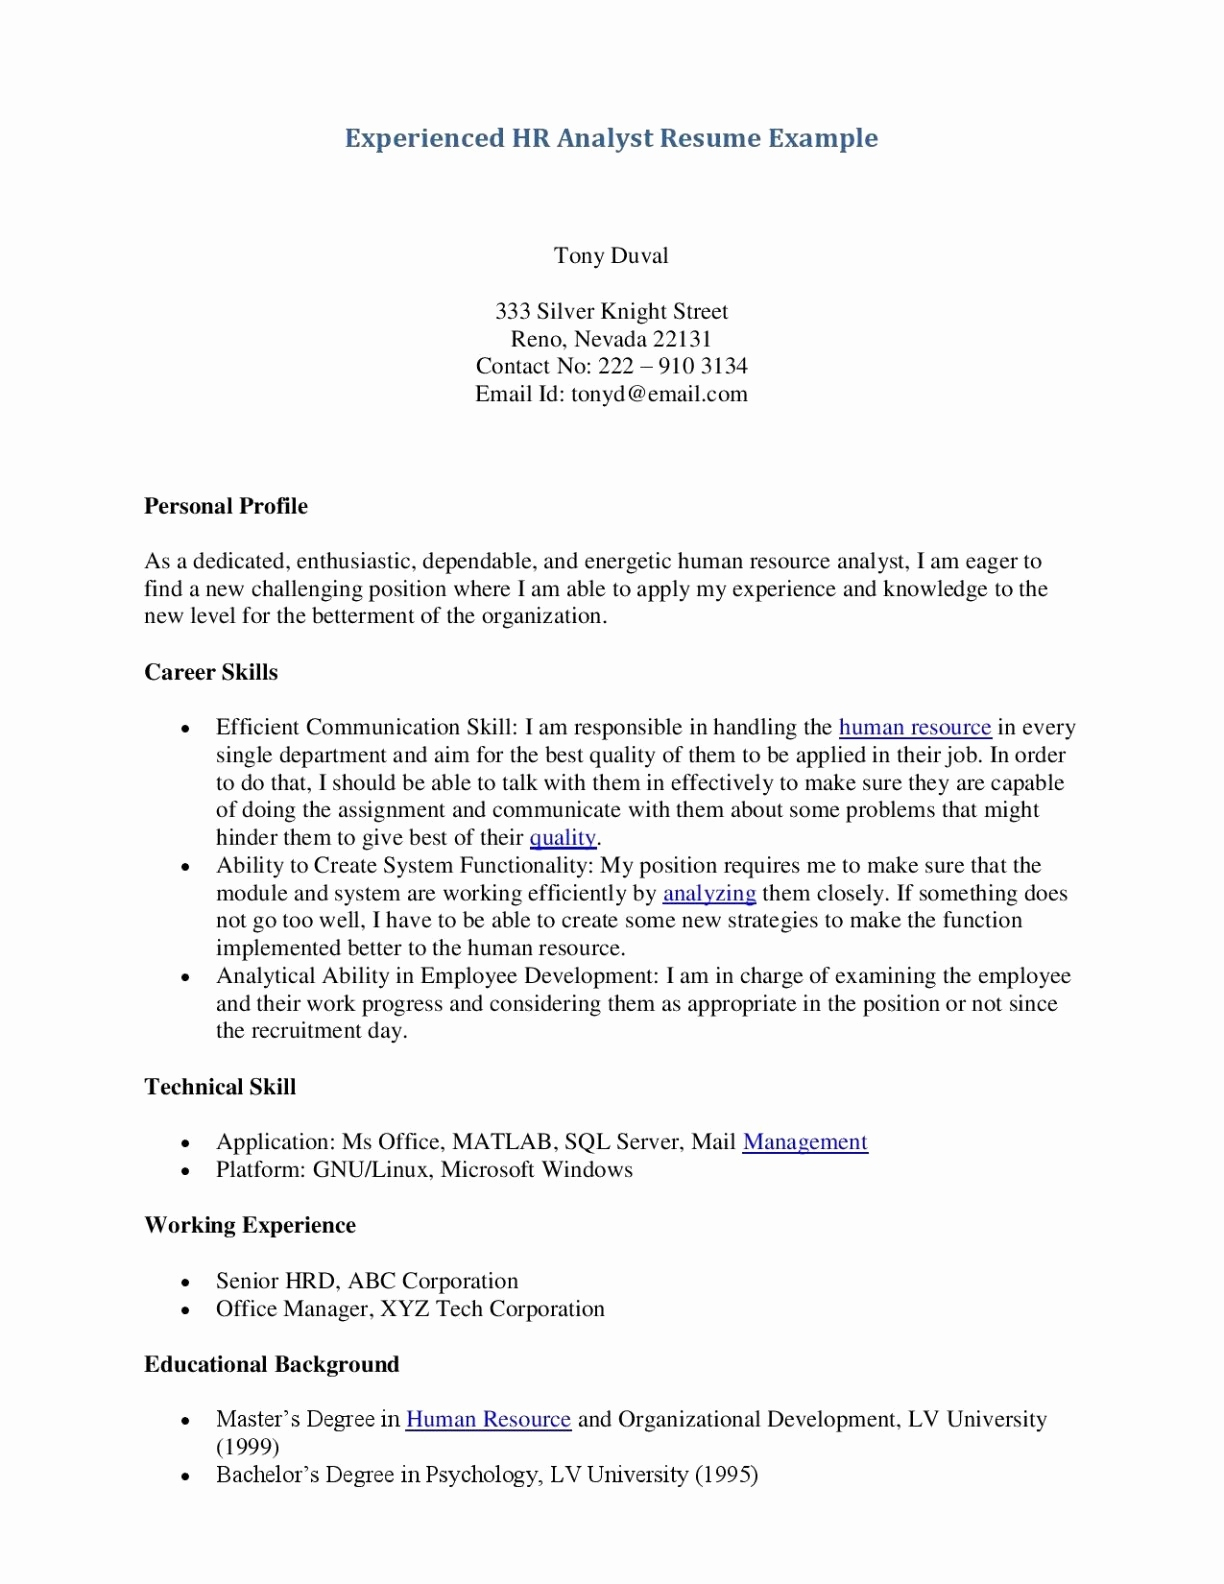 Sales Cover Letter Template - Elegant Sales Cover Letter Template